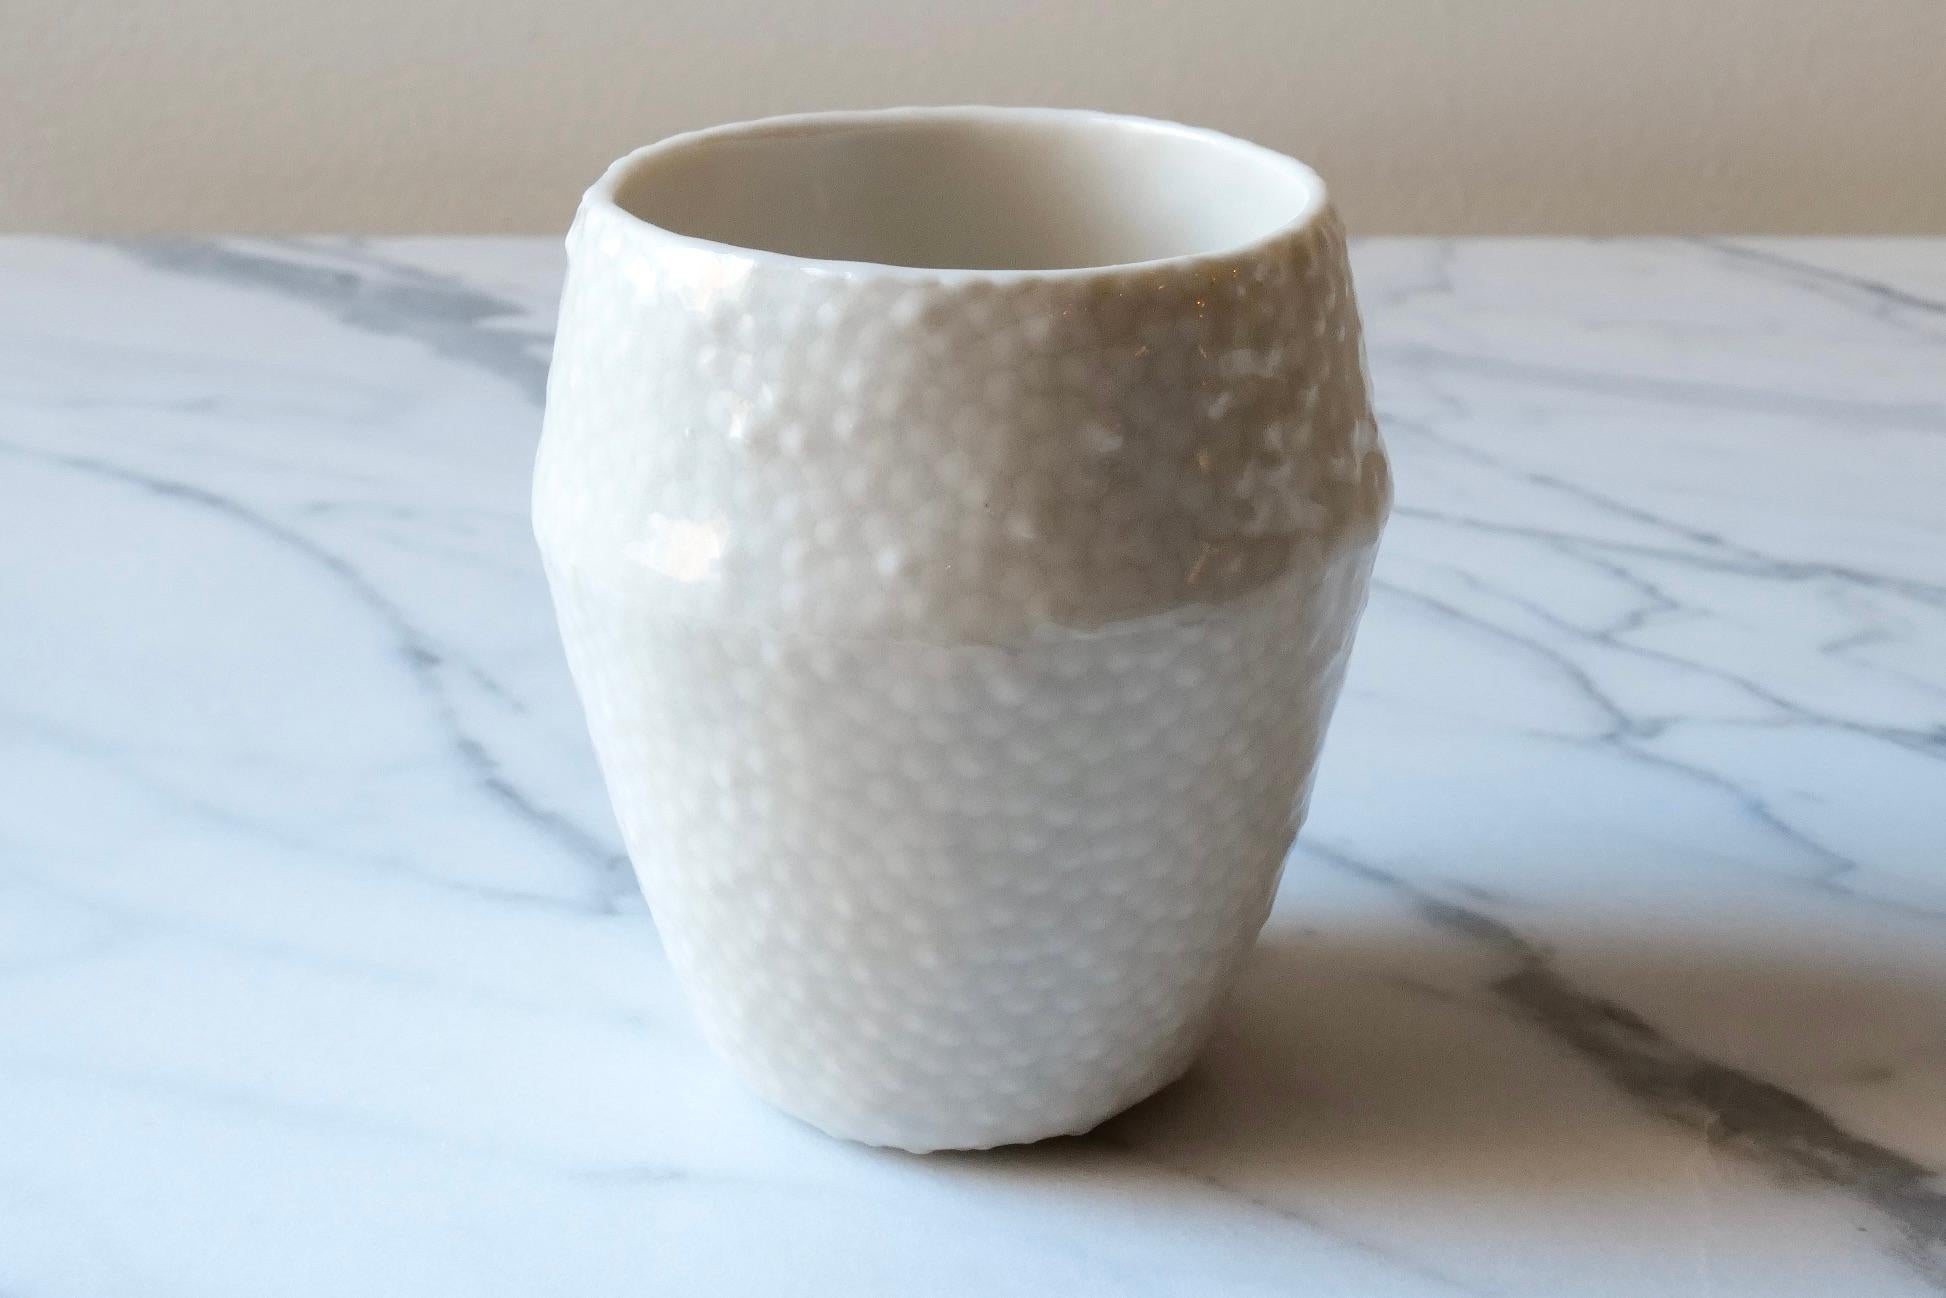 Delicate ceramic drinking cup. Hand-cast in porcelain using a mold hand-carved by the artist. The cup is coated with a thick, luminous clear glaze revealing lots of texture below a sleek glossy finish, like looking into a pond and finding frogspawn